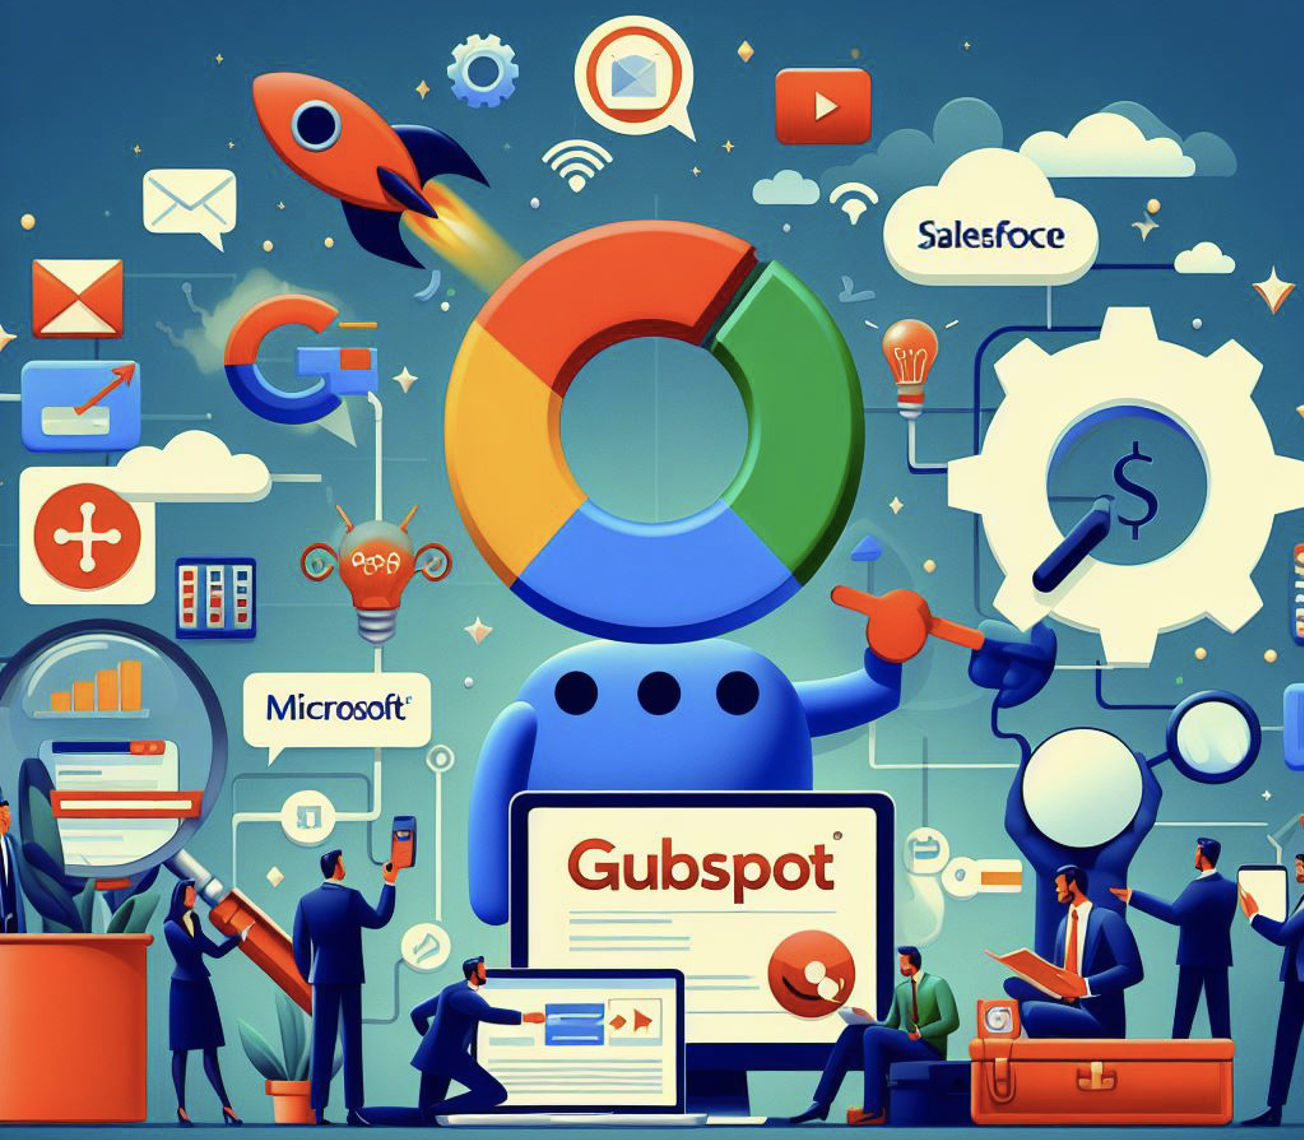 The Google-HubSpot merger rumours – A shakeup in the making for CRM, Marketing, and Advertising? 